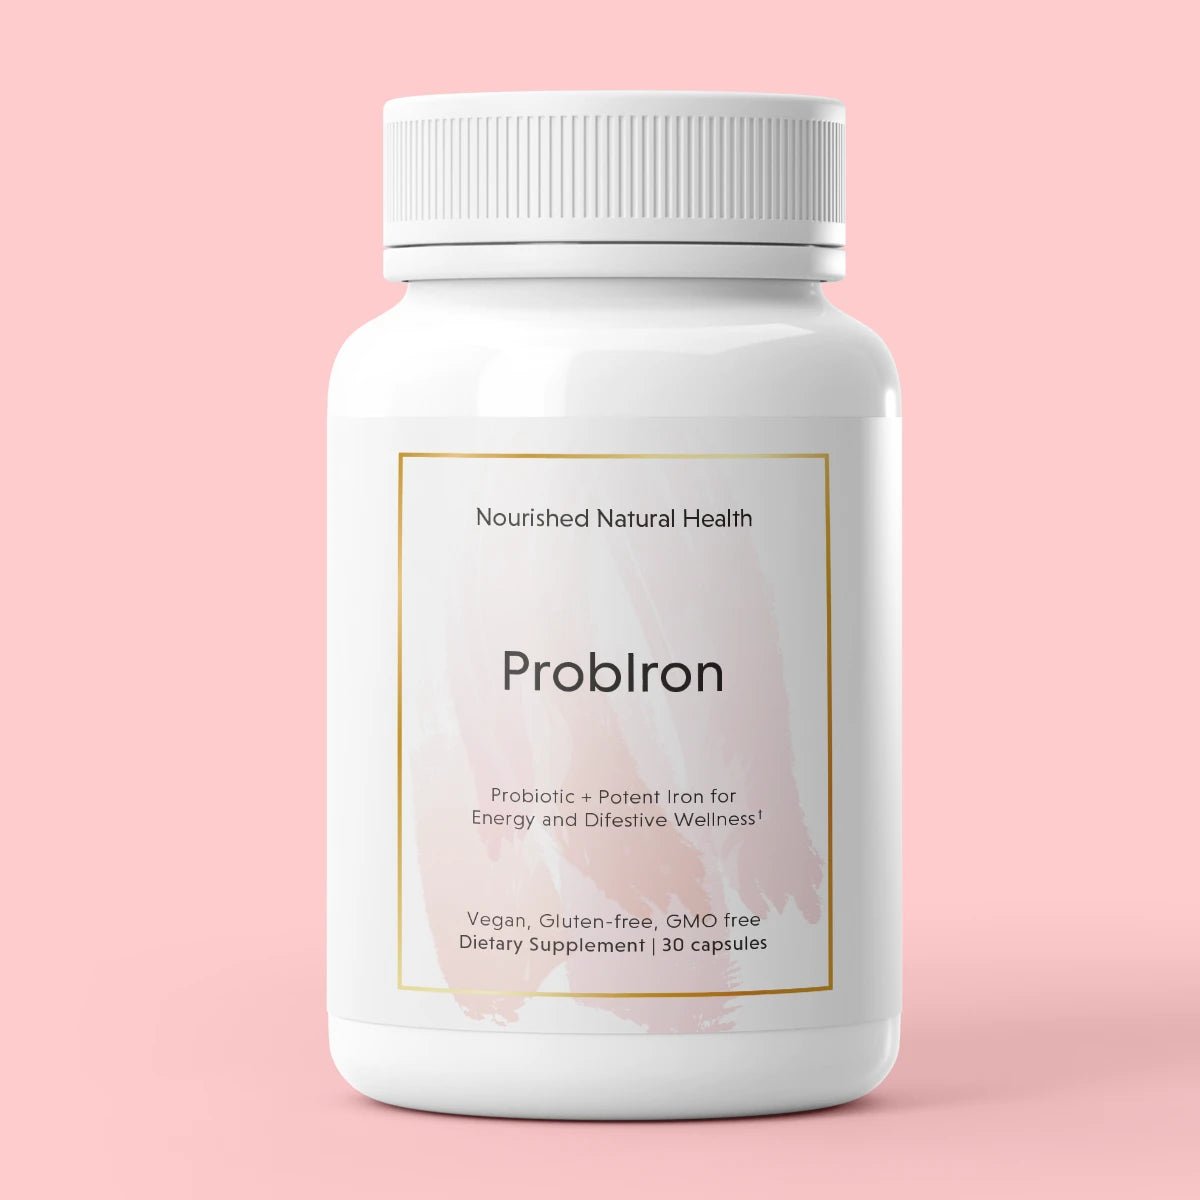 Nourished ProbIron - Probiotic + Potent Iron for Energy & Digestive Wellness - Nourished Natural Health